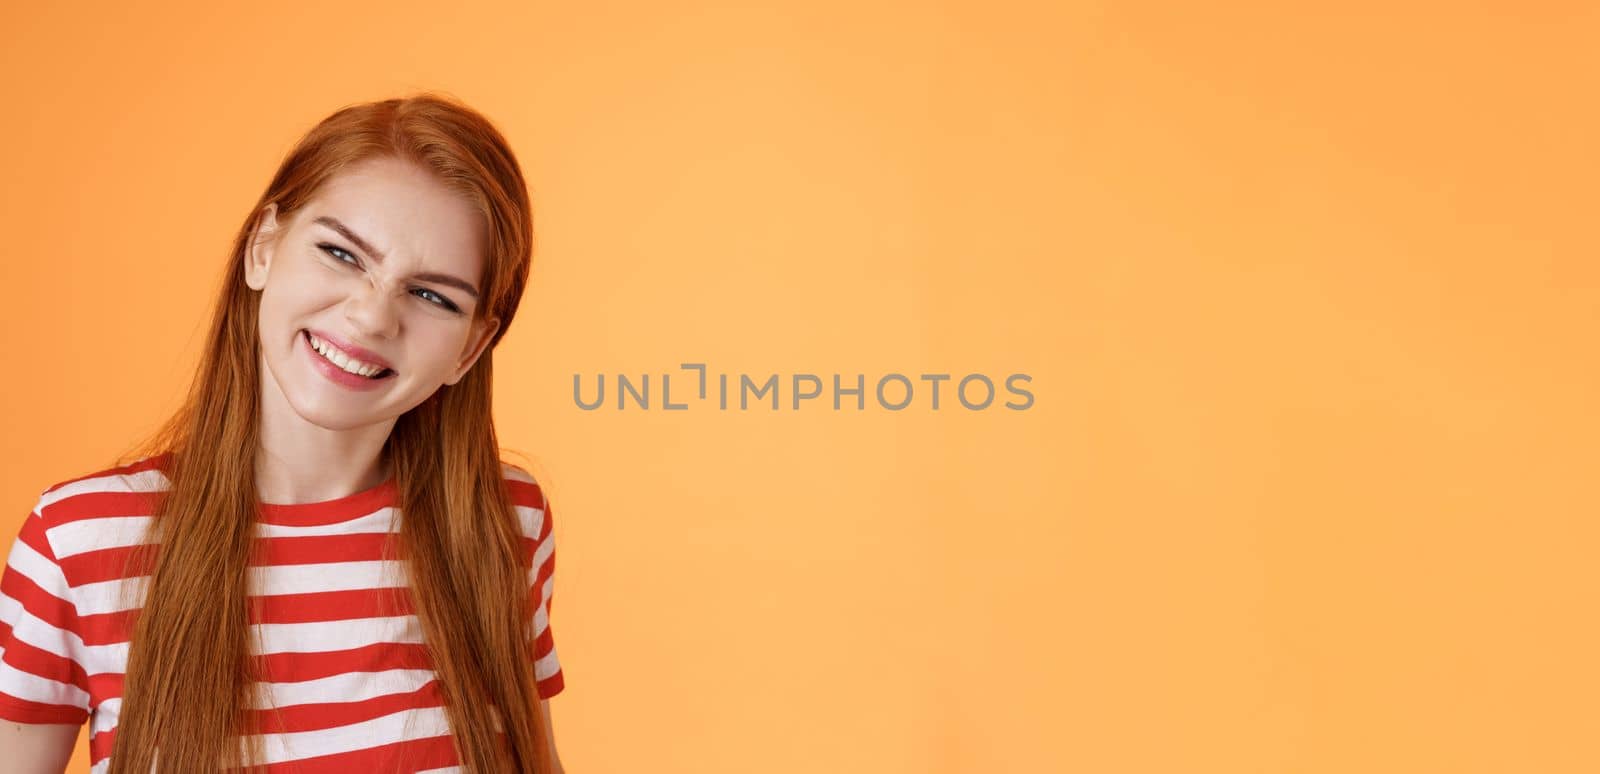 Sassy confident redhead daring girl have perfect summer plans, vacation ideas, inspired create something awesome, wrinkle nose excited, smiling satisfied look left assured, satisfied expression.